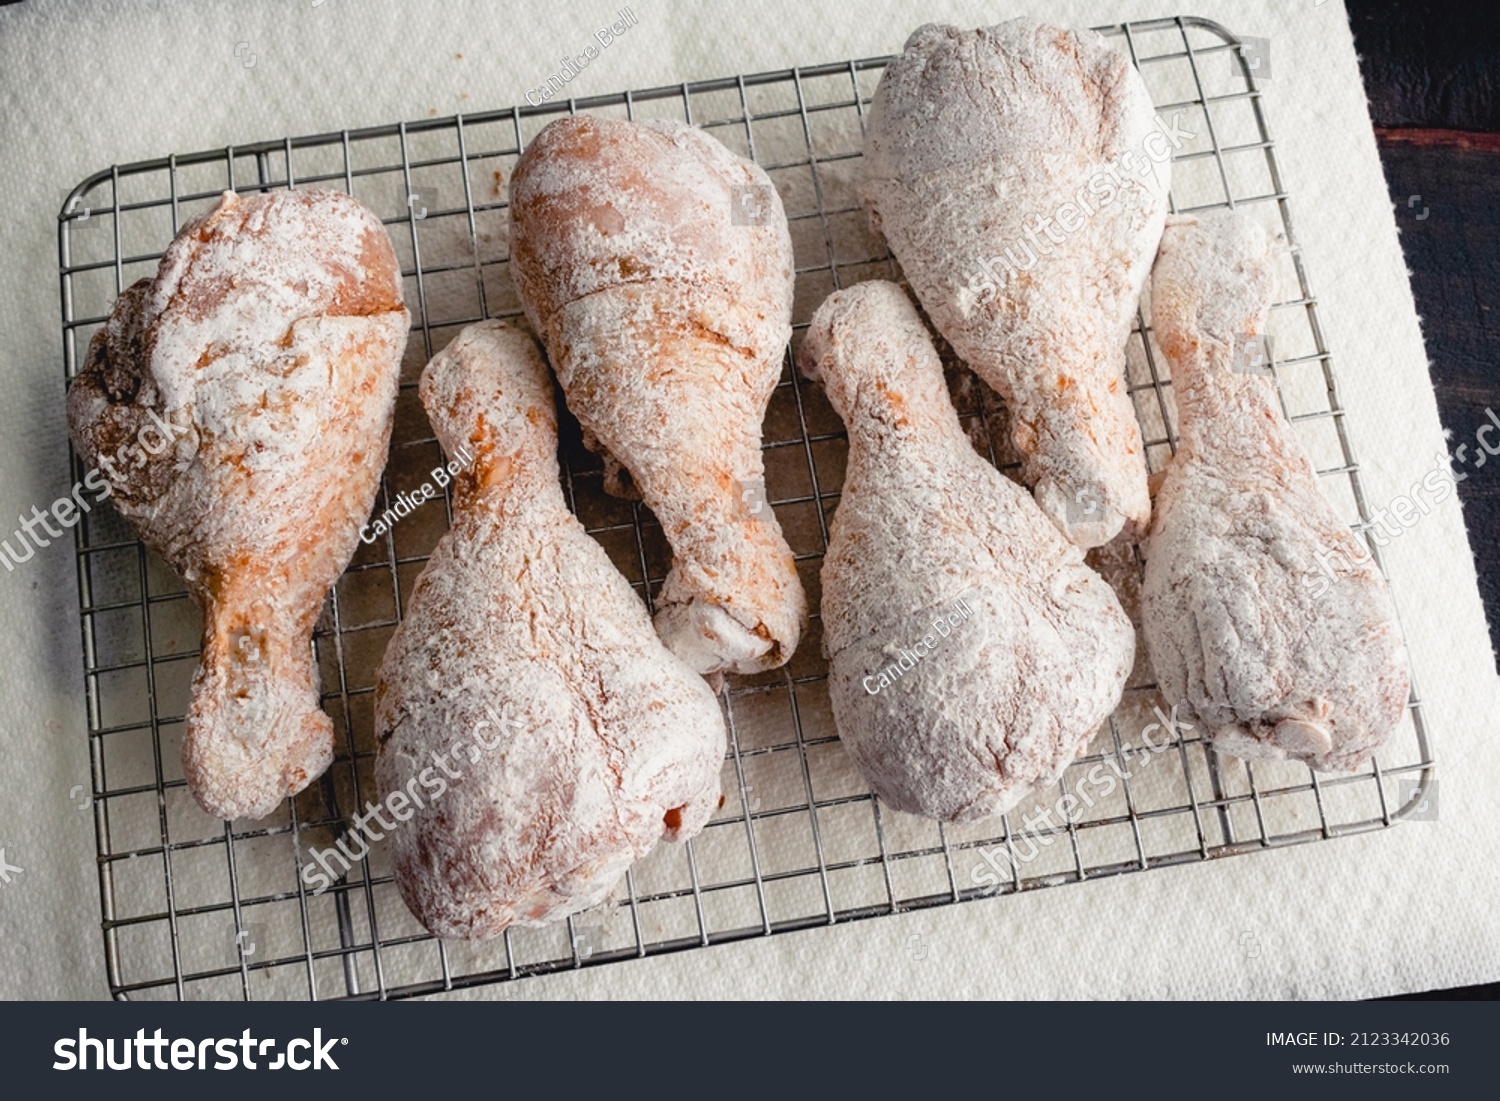 Raw Floured and Spiced Chicken Drumsticks on a Wire Rack: Floured uncooked chicken legs being prepped for frying #2123342036